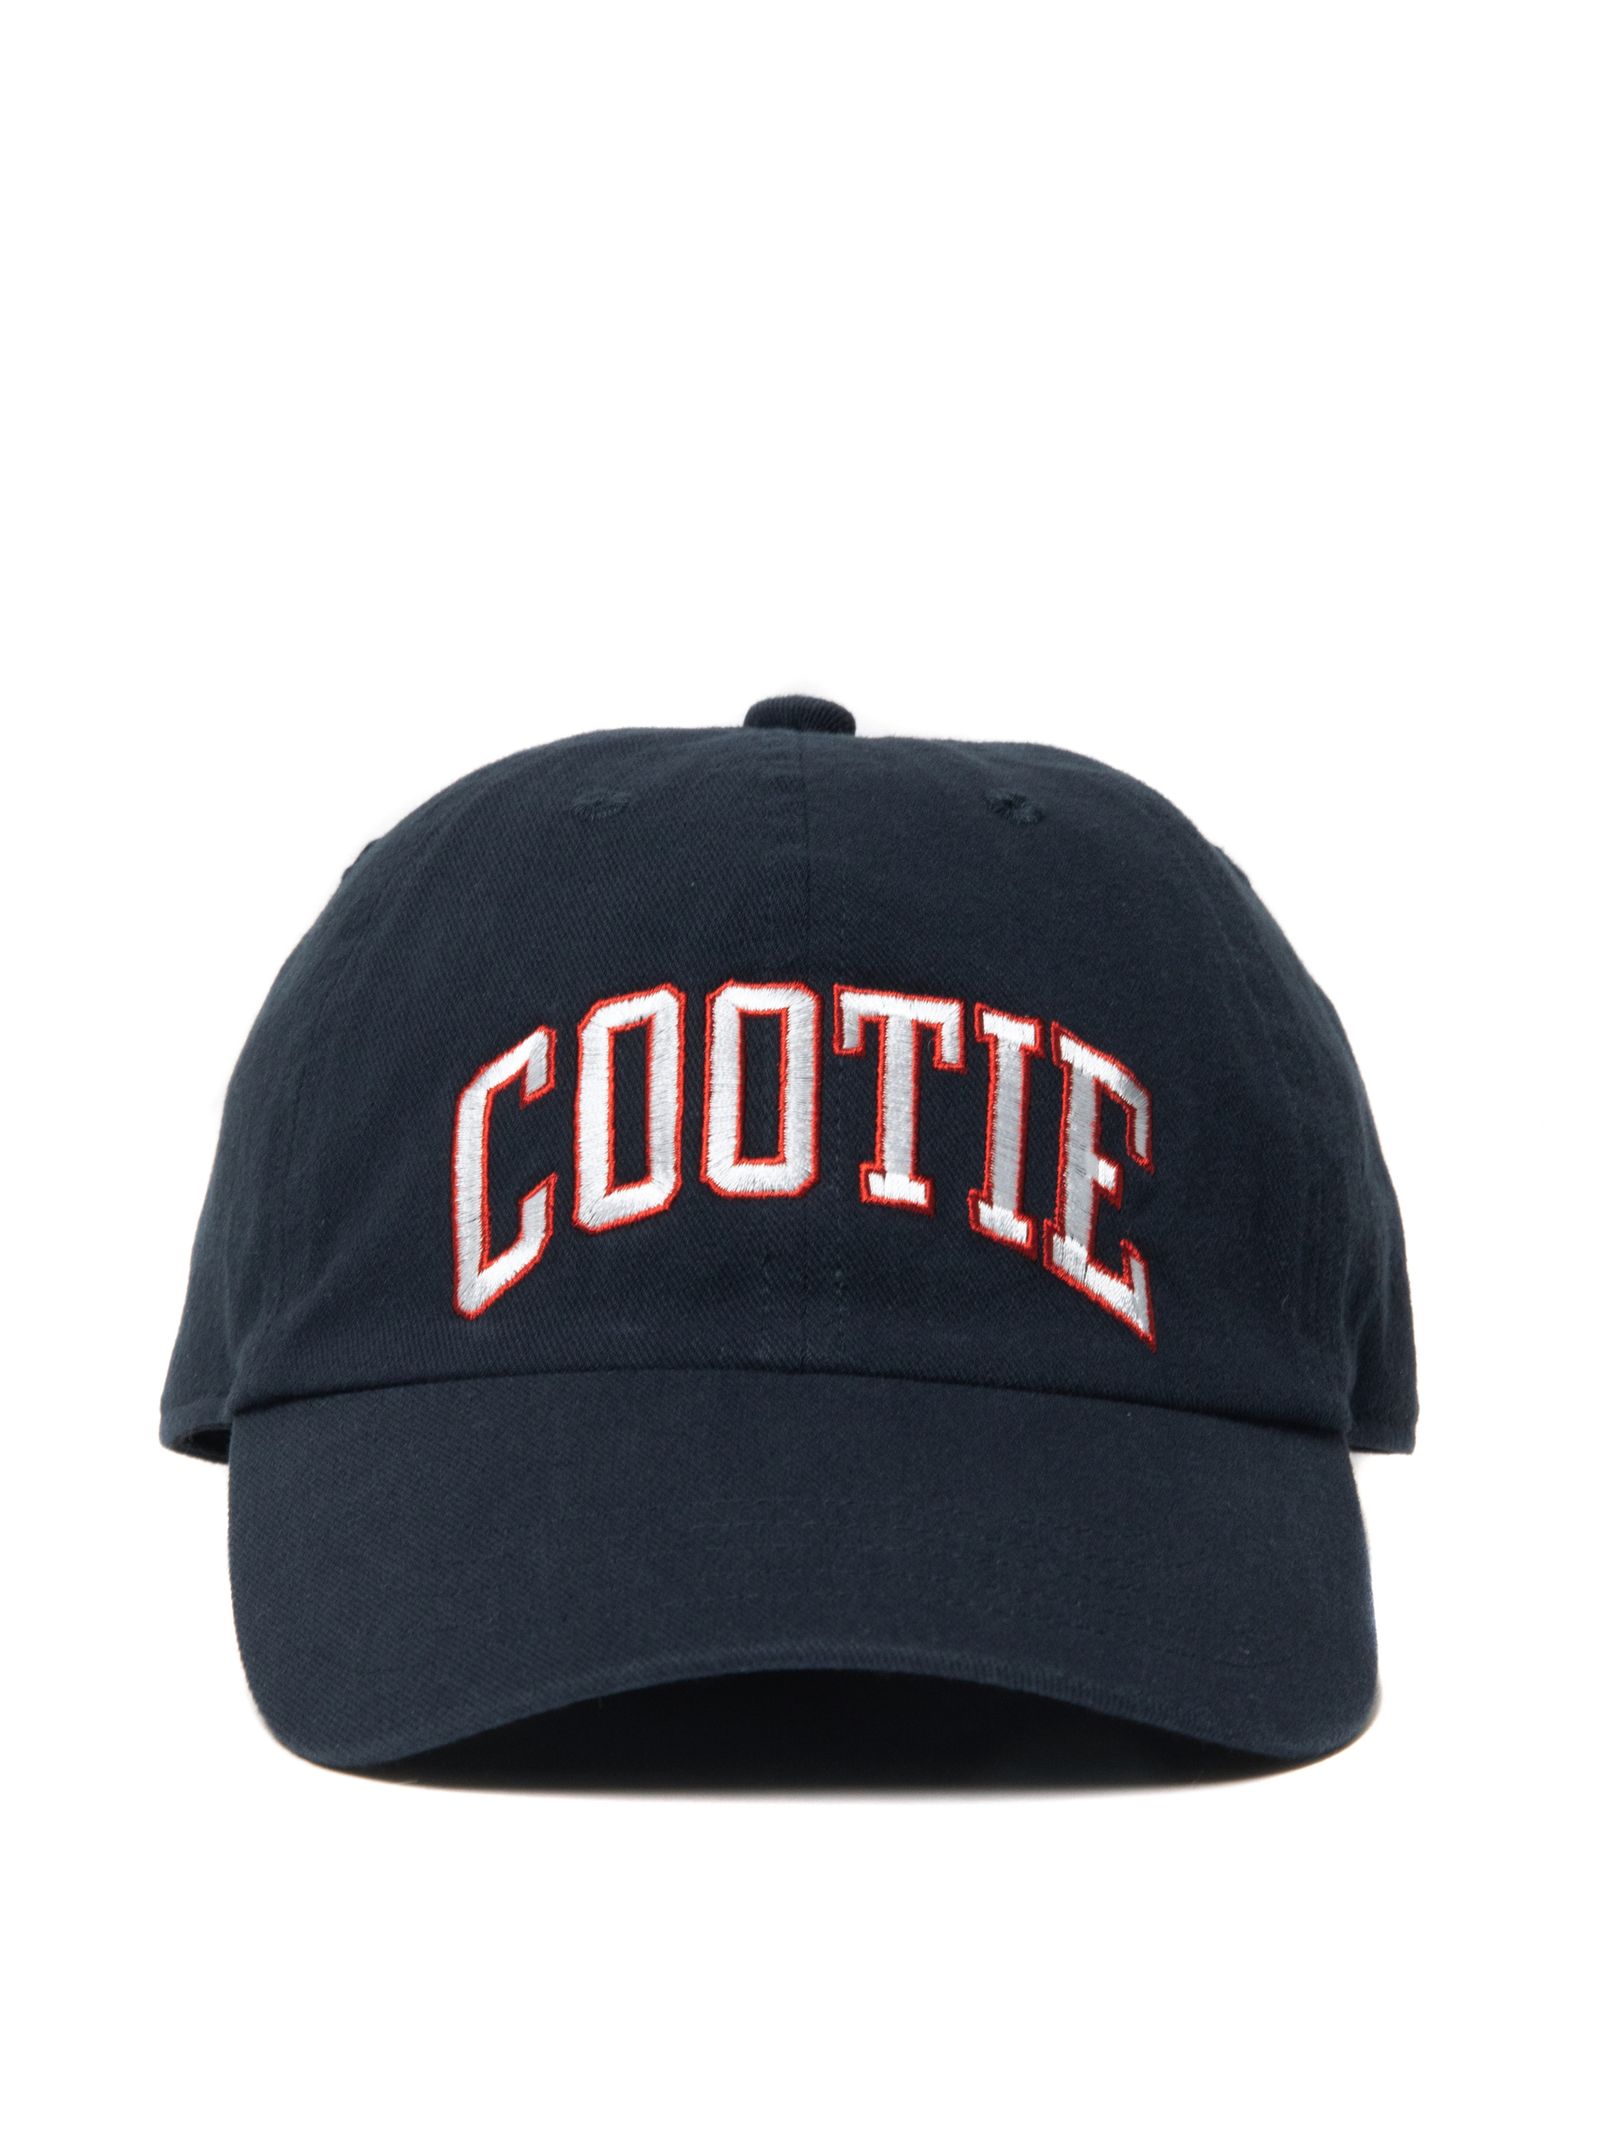 COOTIE PRODUCTIONS - Embroidery 6 Panel Cap (NAVY) / ロゴ ...